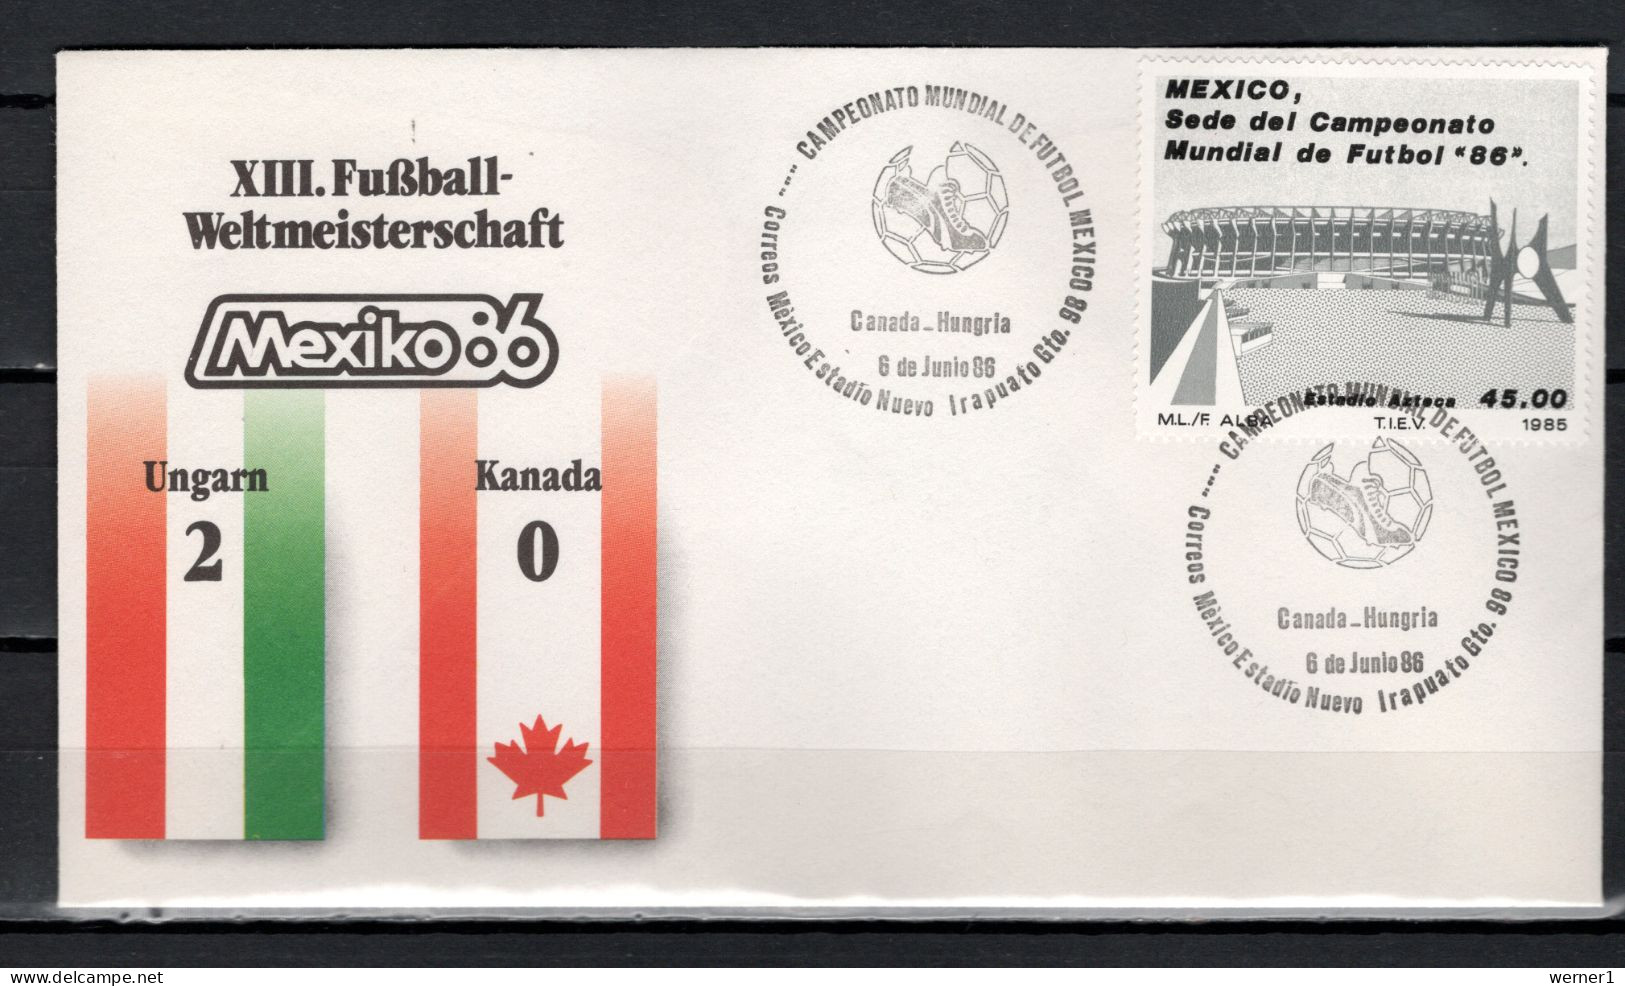 Mexico 1986 Football Soccer World Cup Commemorative Cover Match Hungary - Canada 2 : 0 - 1986 – Messico